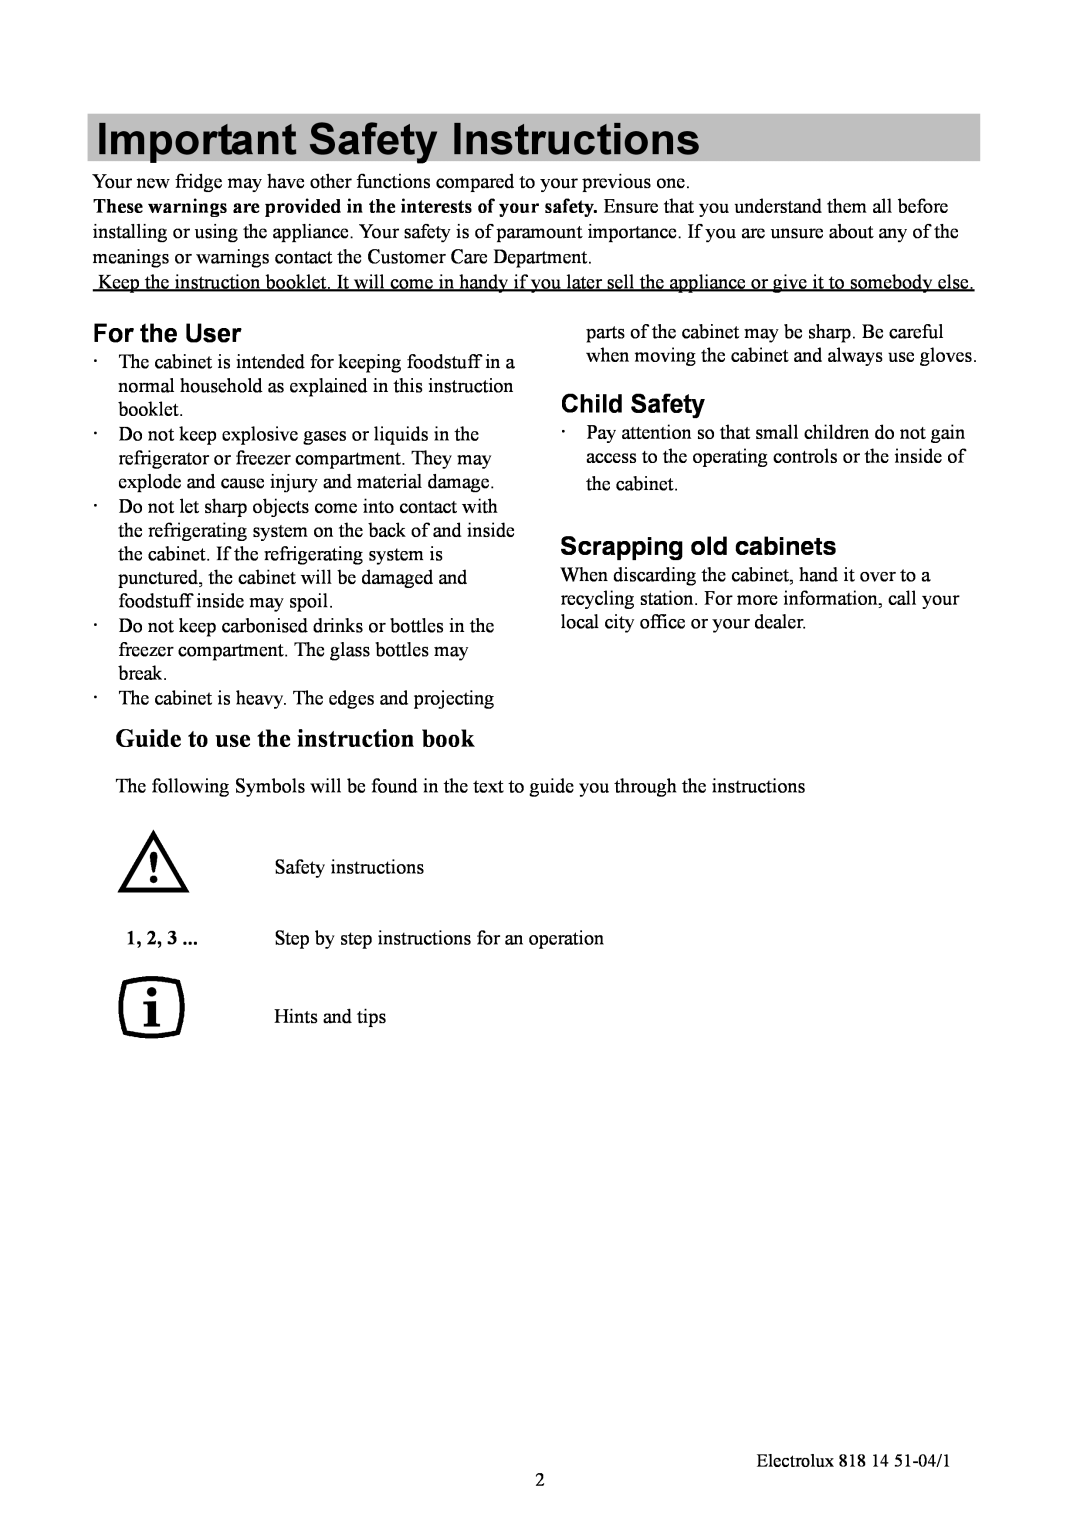 Electrolux ER8817C manual Important Safety Instructions, For the User, Child Safety, Scrapping old cabinets 